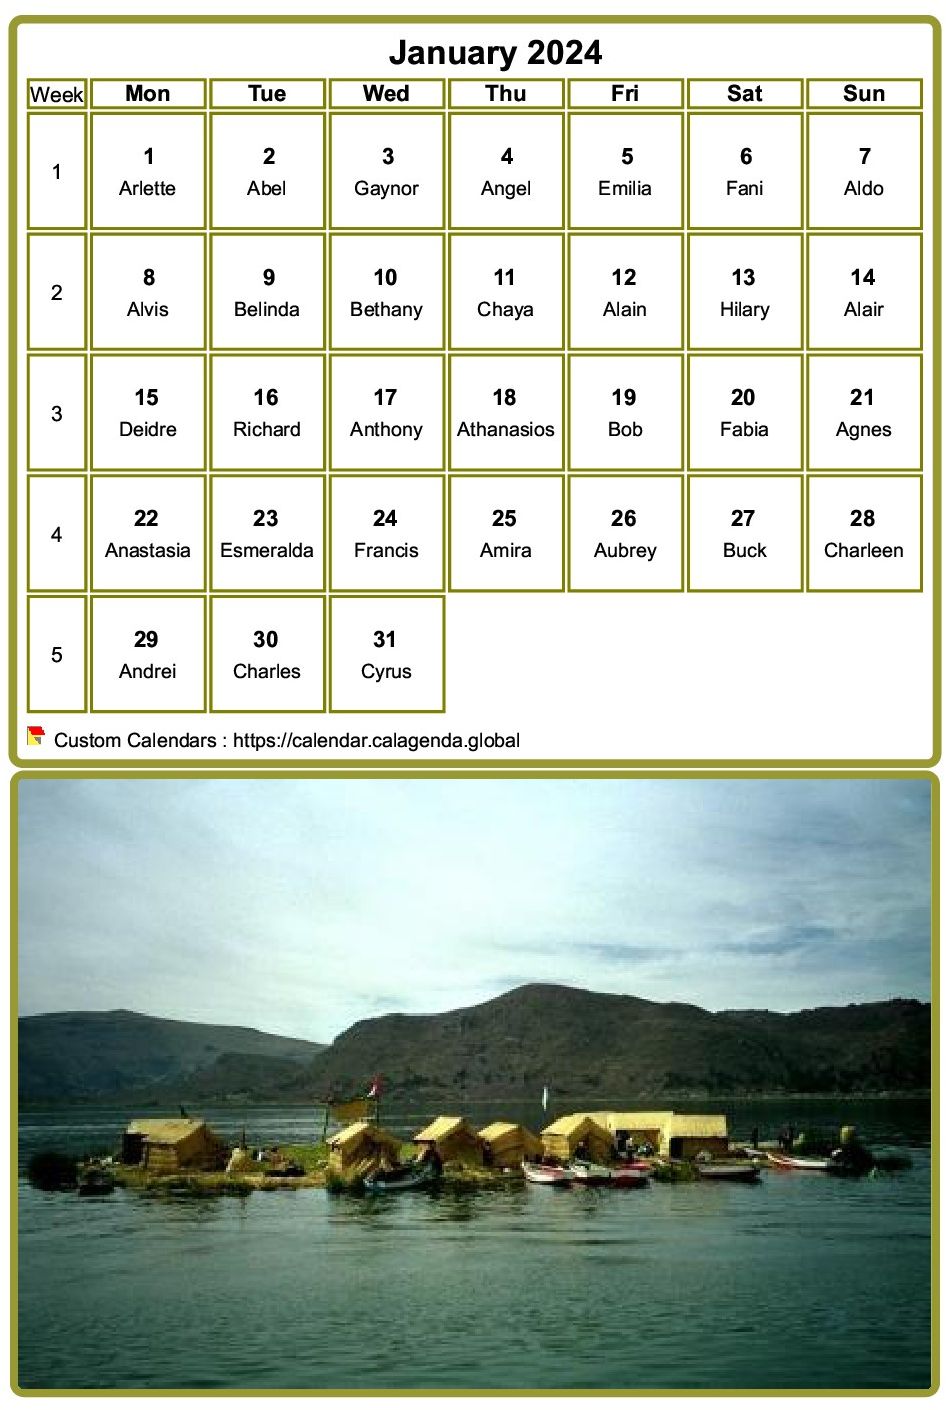 Calendar monthly 2024, table with photo